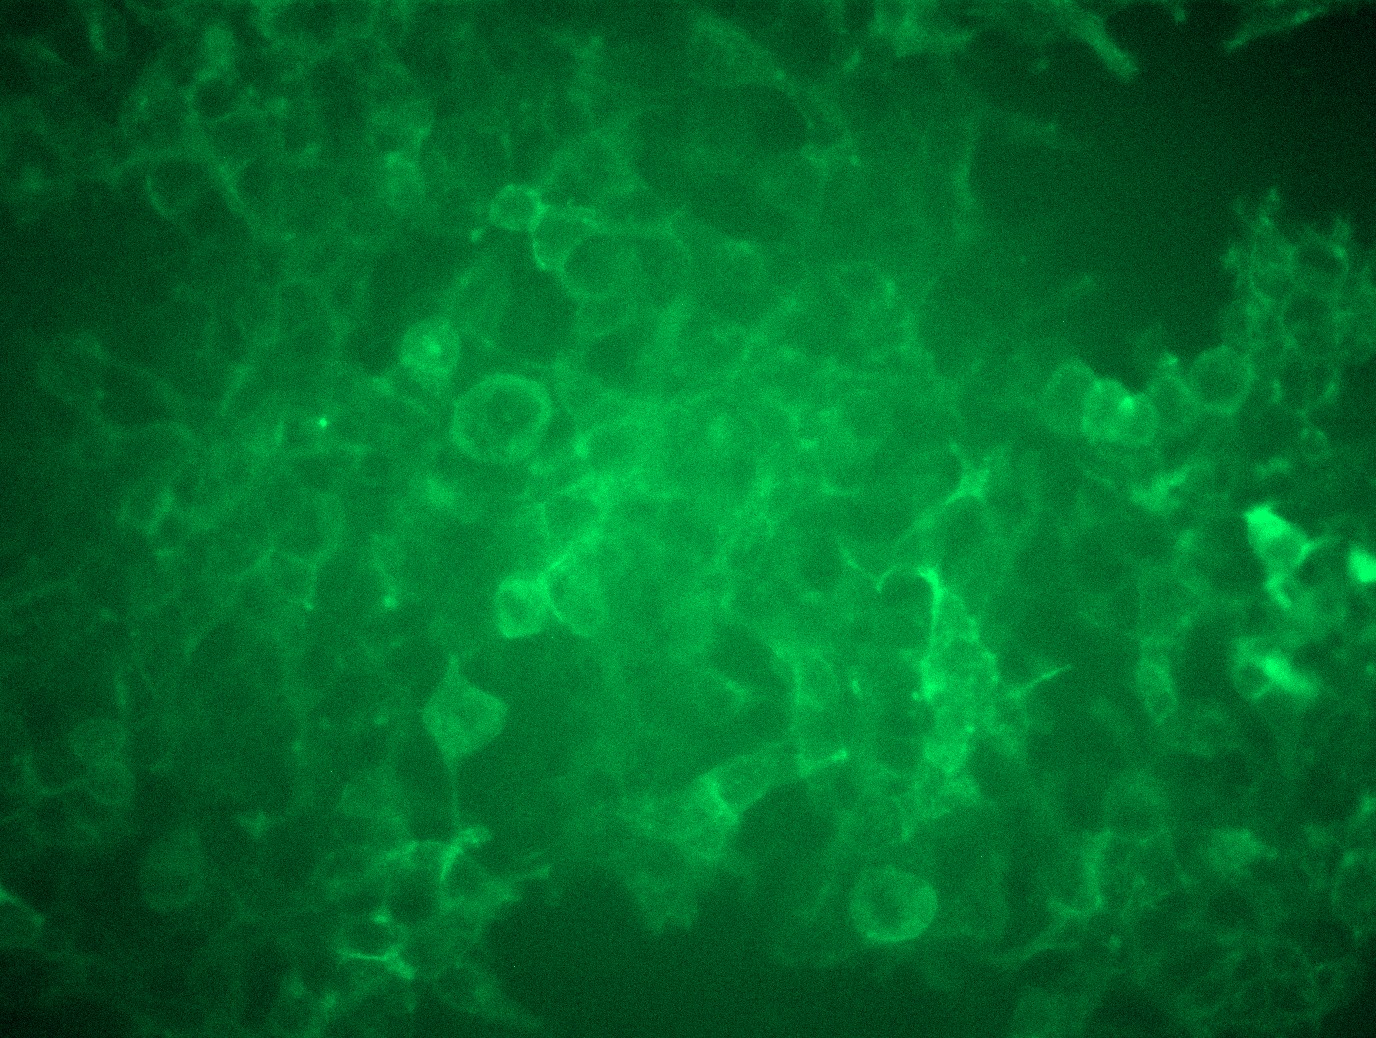 RC207770L3 was used to prepare Lentiviral particles using TR30037 packaging kit. HEK293T cells were transduced with RC207770L3V particle to overexpress human LILRB2-Myc-DDK fusion protein.